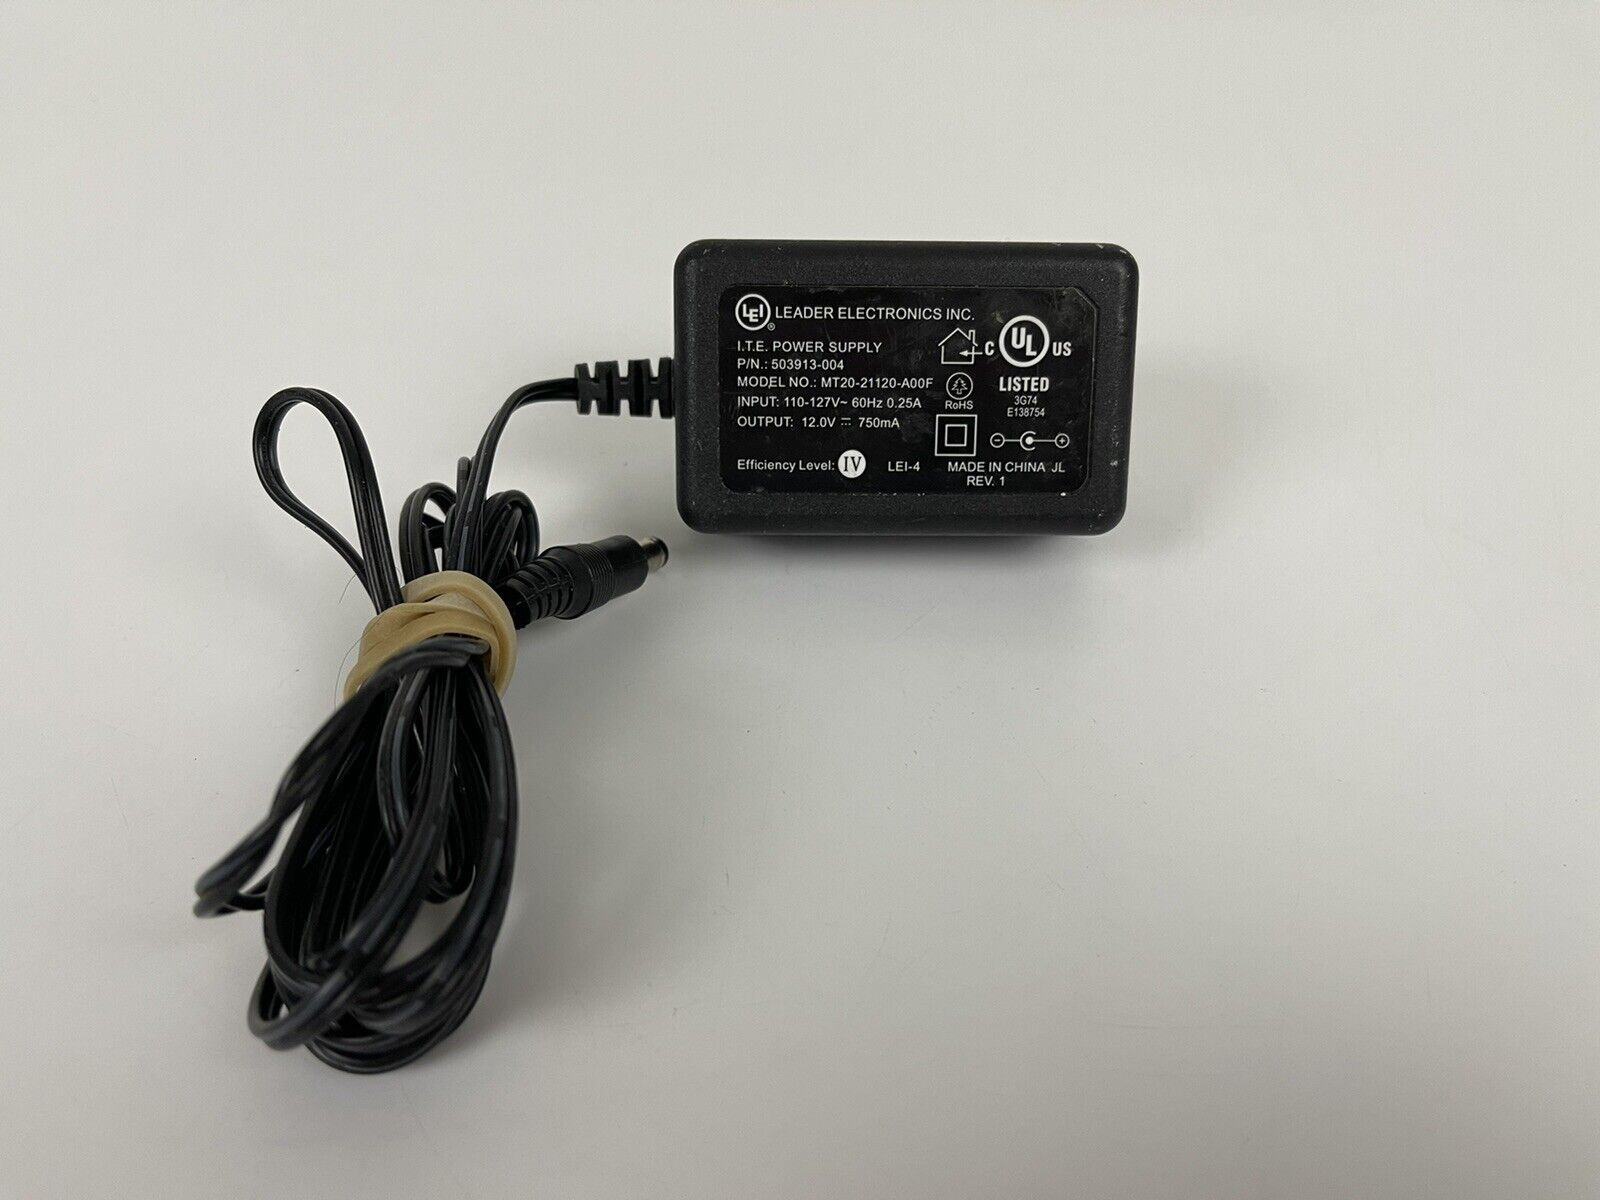 LEI MT20-21120-A00F AC Power Supply Adapter Charger 12V DC 750mAh Brand: Lei Type: AC/DC Adapter Output Voltage: 12 - Click Image to Close